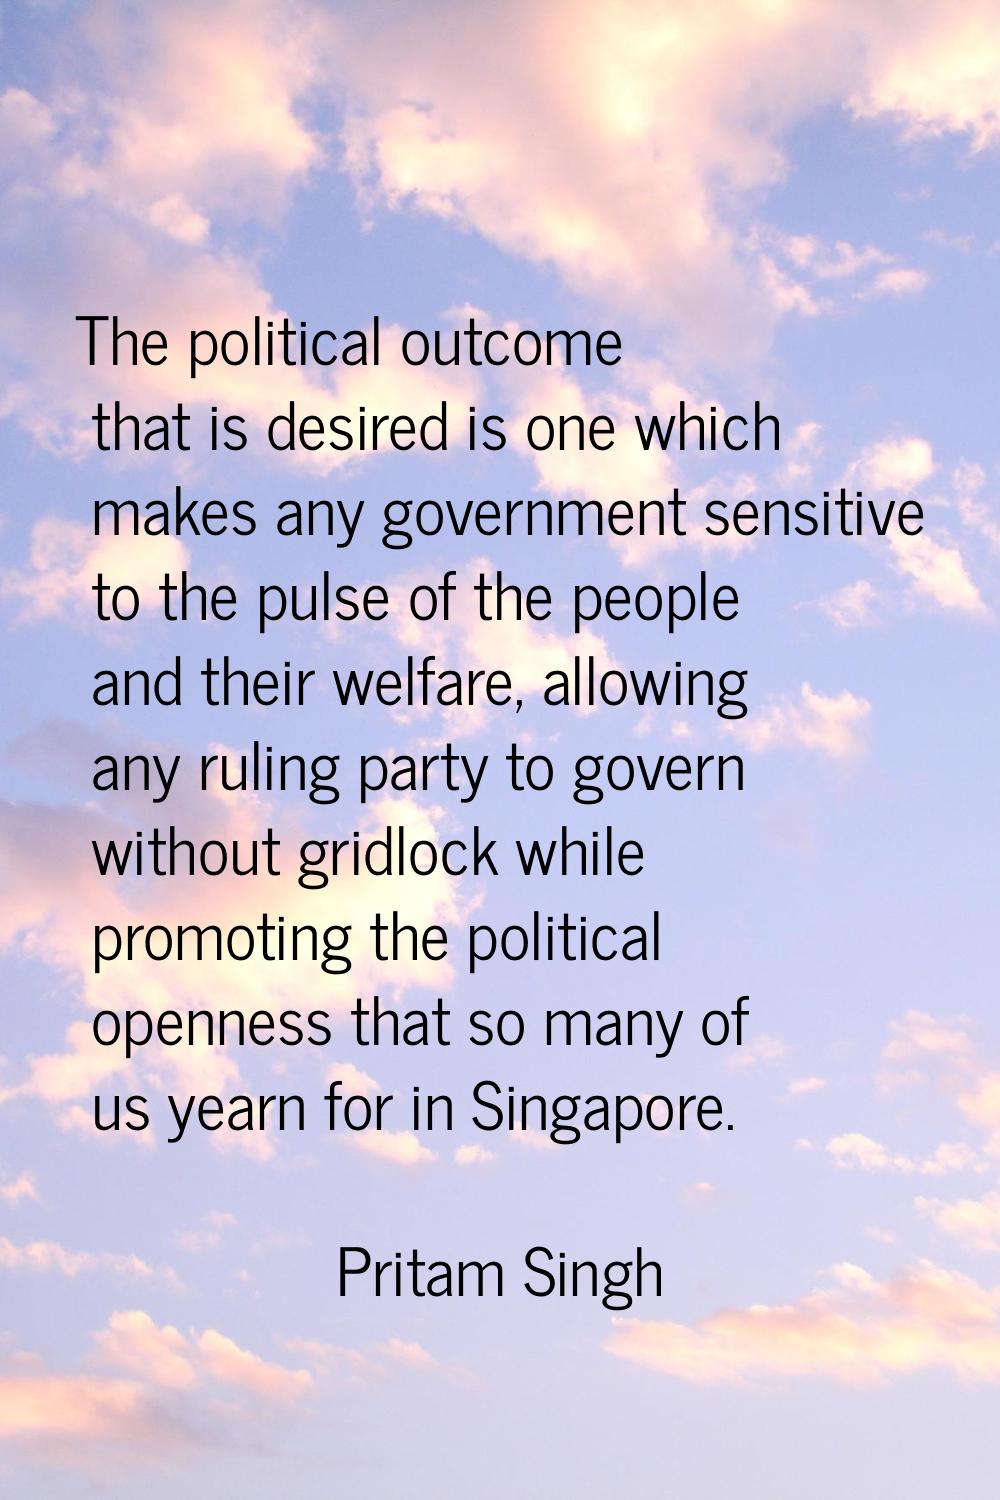 The political outcome that is desired is one which makes any government sensitive to the pulse of t